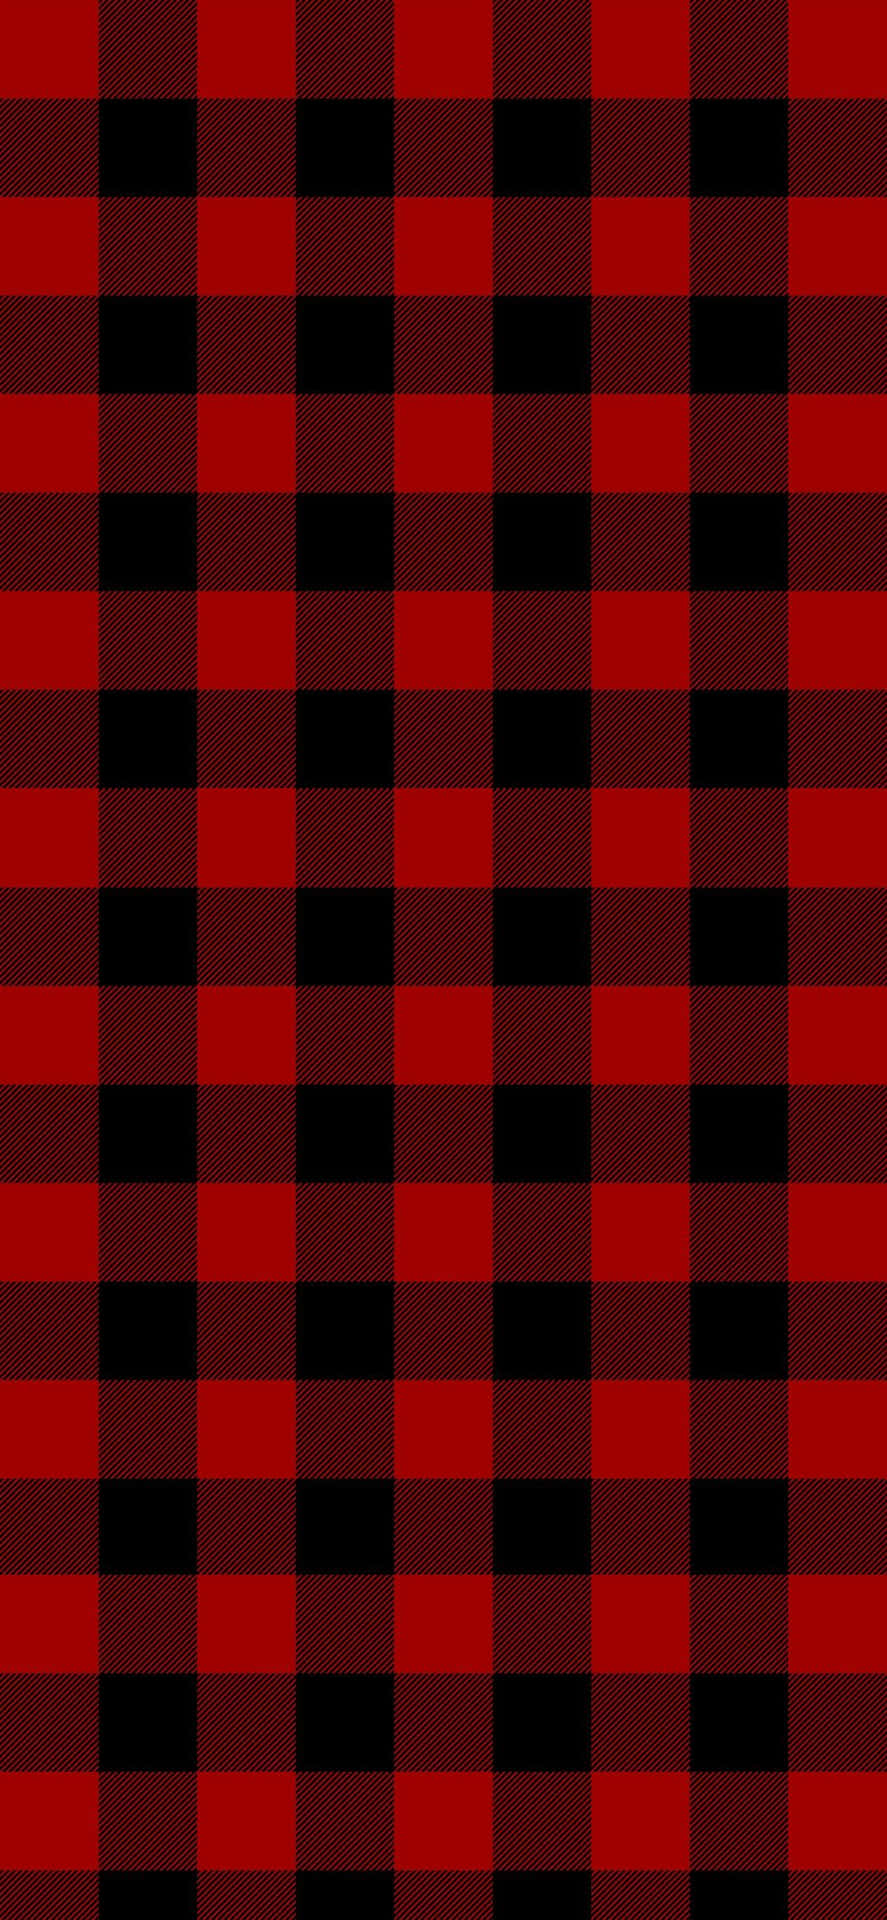 100+] Black And Red Plaid Wallpapers 